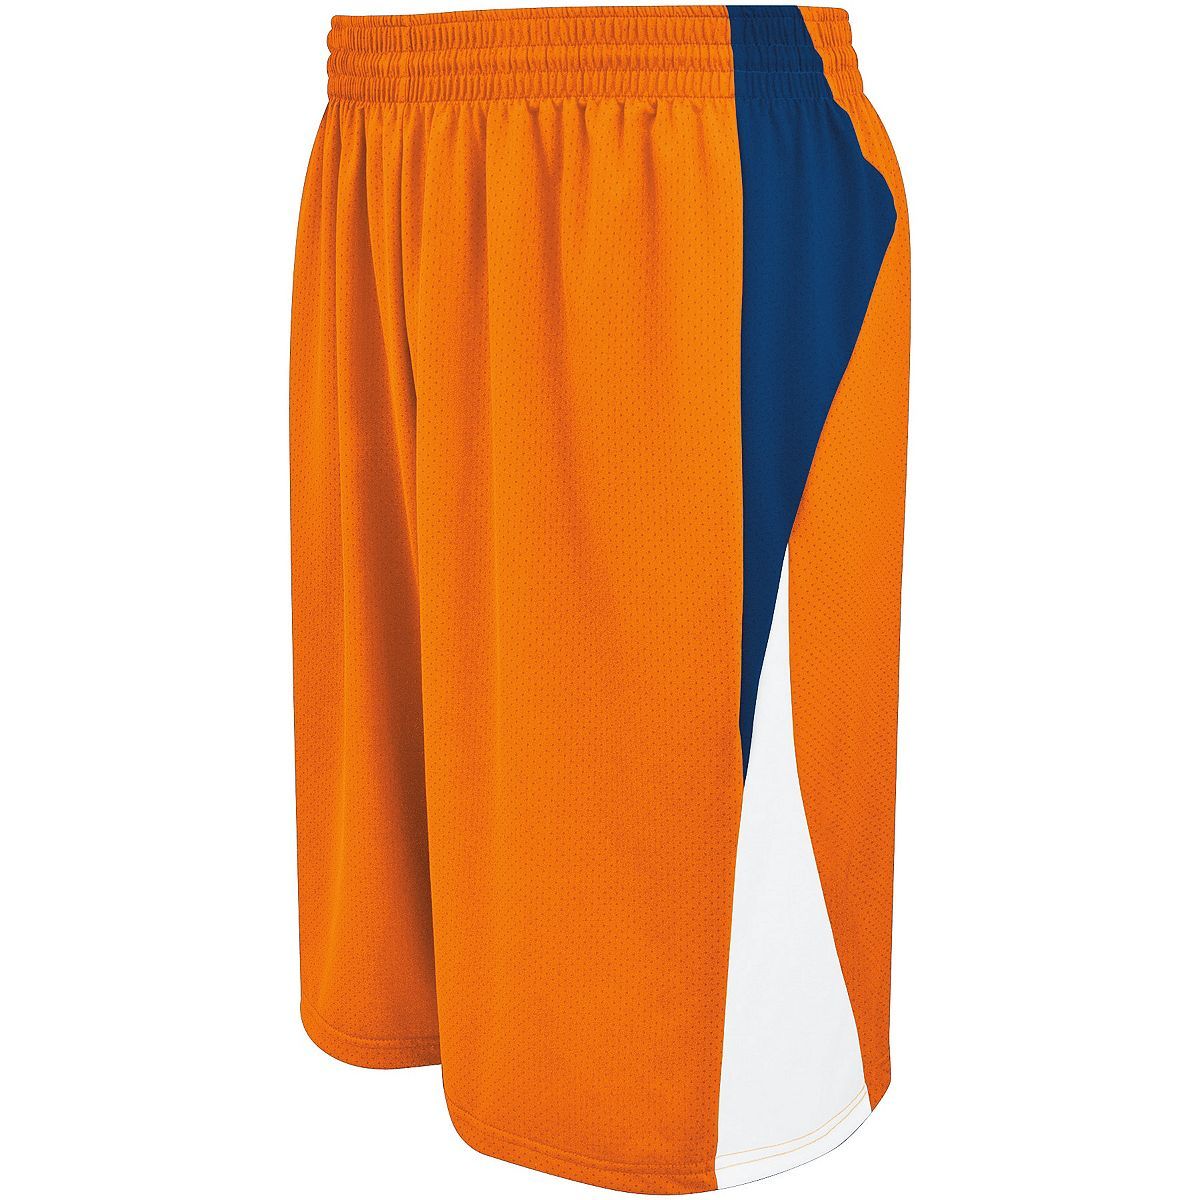 Holloway Campus Reversible Shorts in Orange/Navy/White  -Part of the Adult, Adult-Shorts, Basketball, Holloway, All-Sports, All-Sports-1 product lines at KanaleyCreations.com